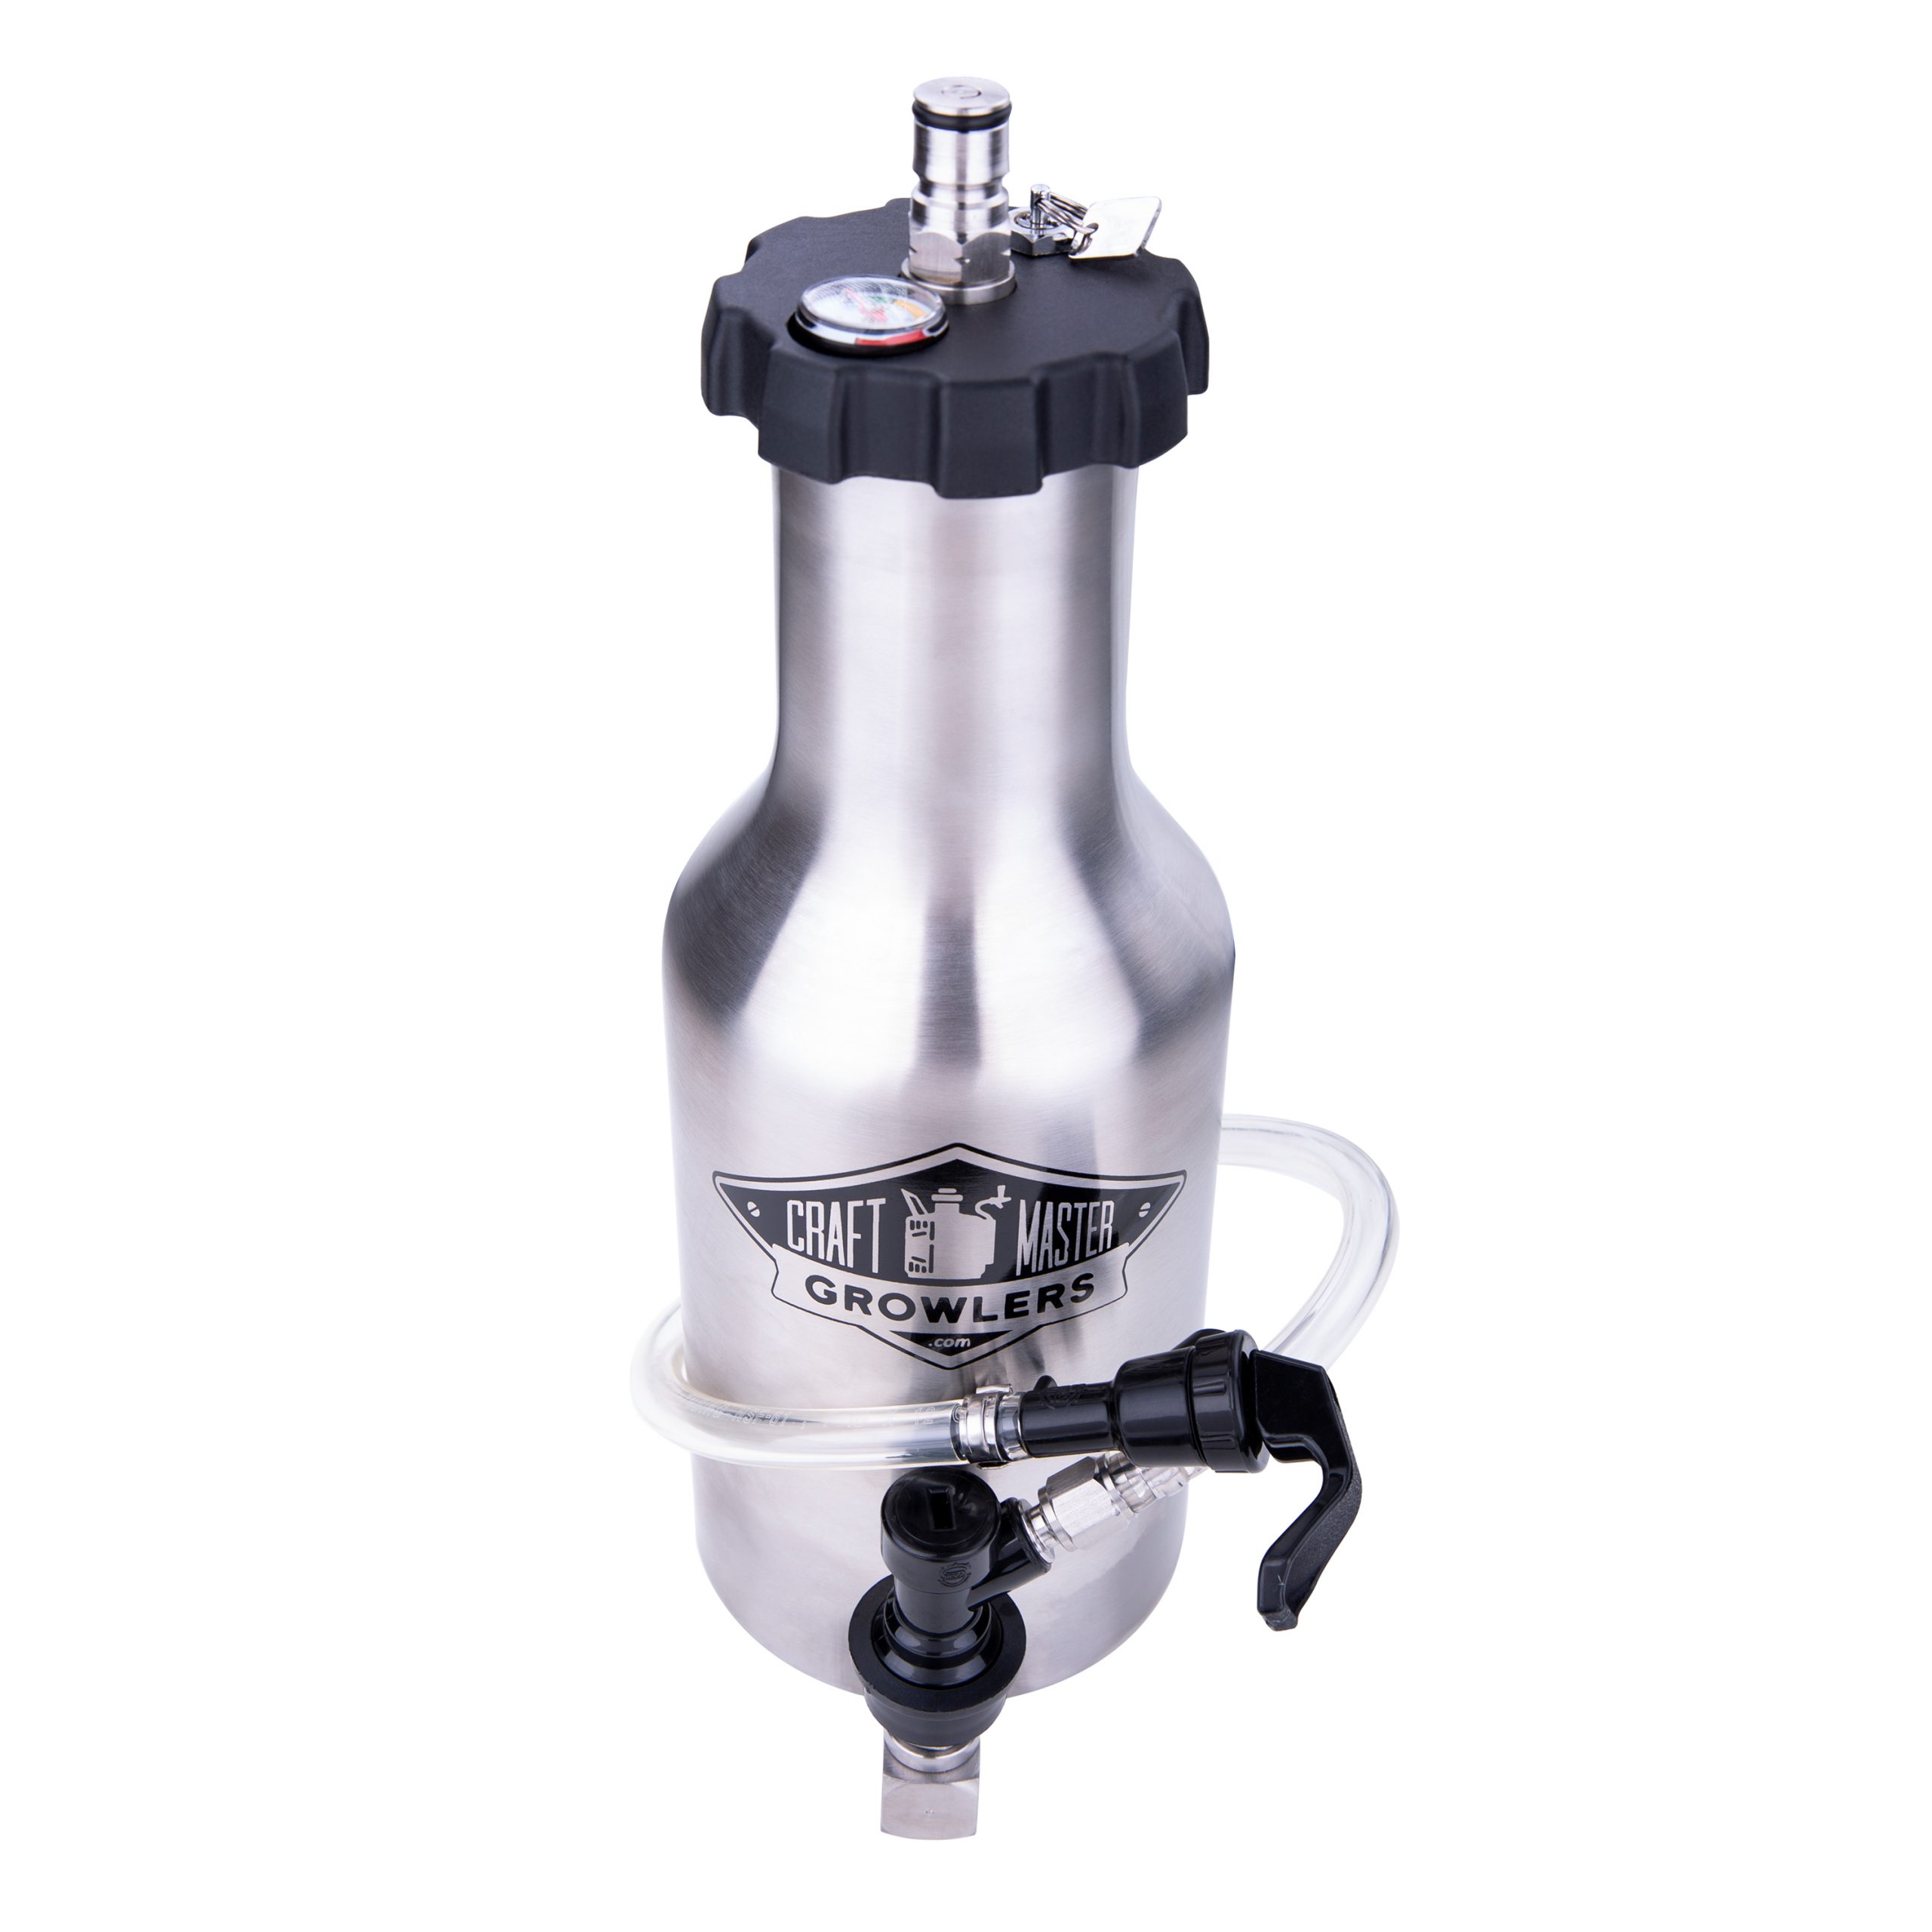 https://www.craftmastergrowlers.com/wp-content/uploads/2020/04/round-silver-Ball-Lock-top-scaled.jpg